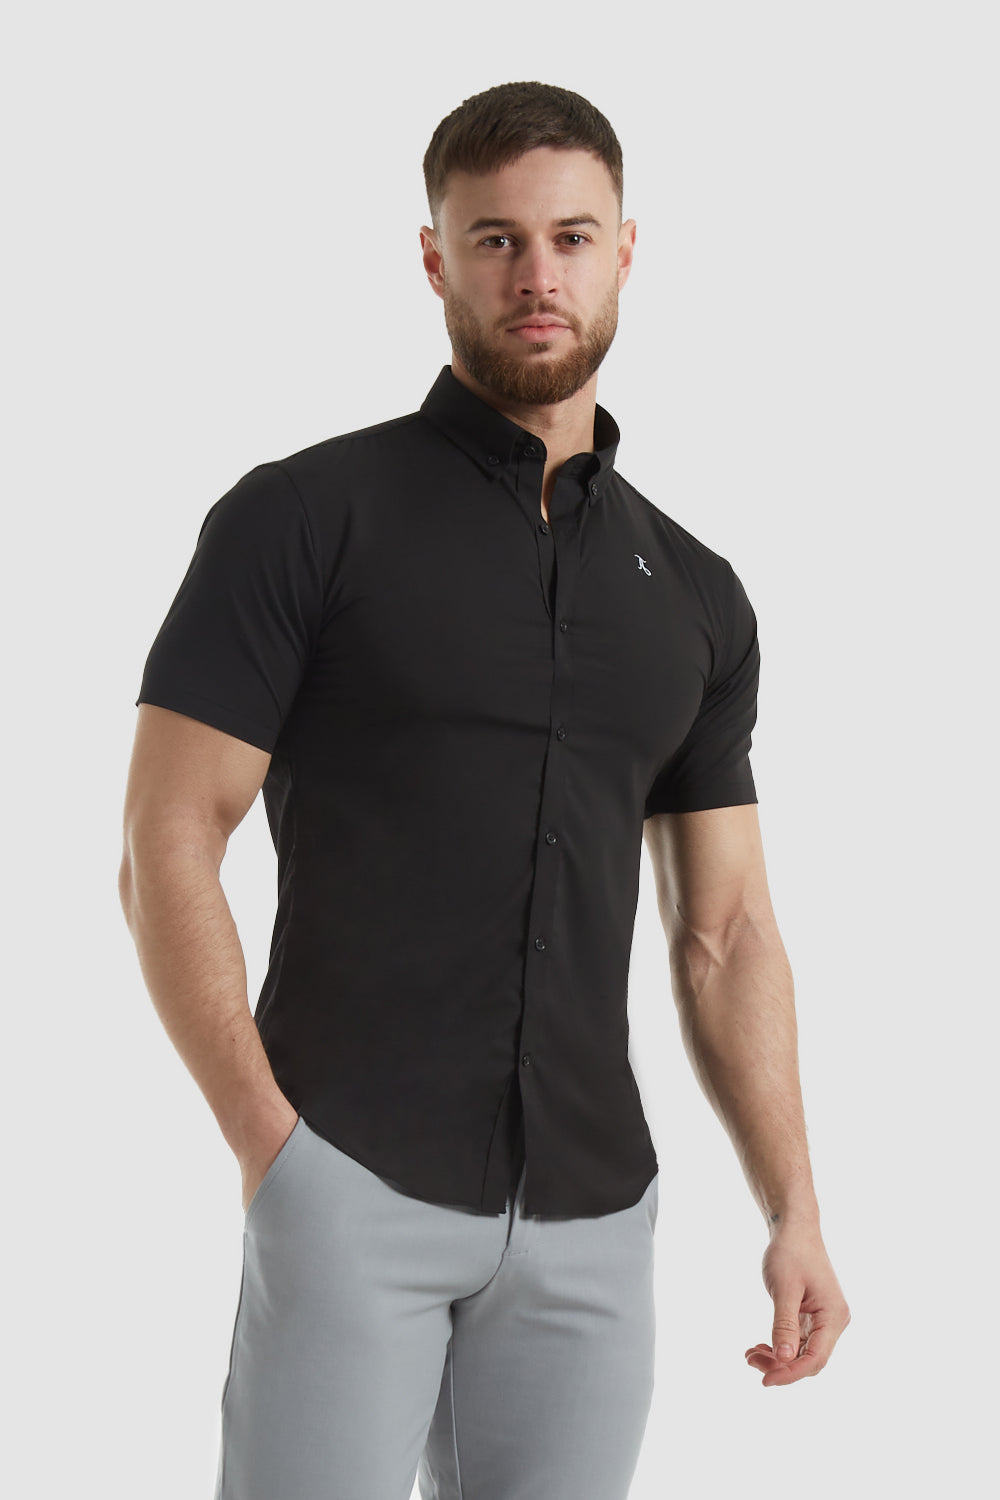 in - Care Shirt ATHLETE USA (SS) Black - Easy Signature TAILORED